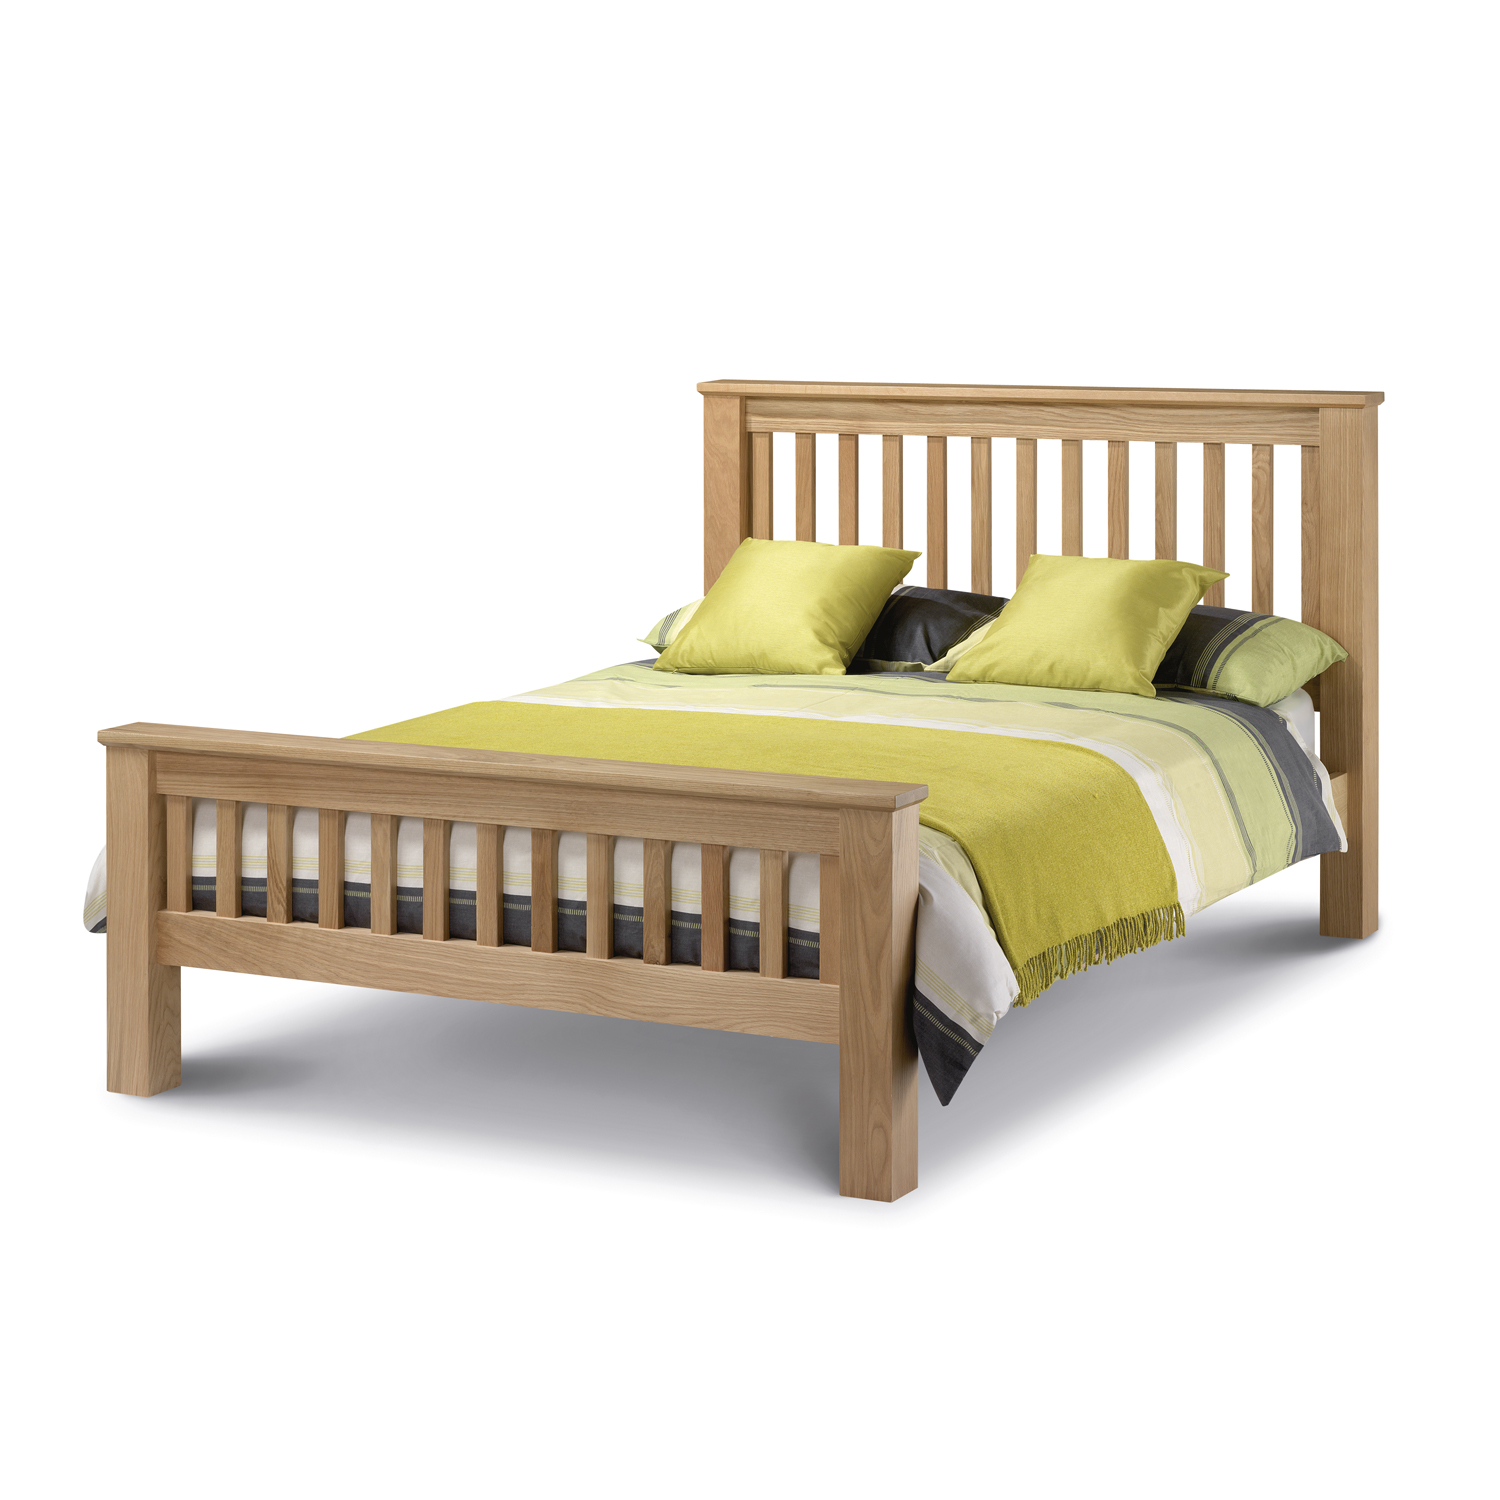 Amber Wooden Bed Frame | Beds | Carpetright